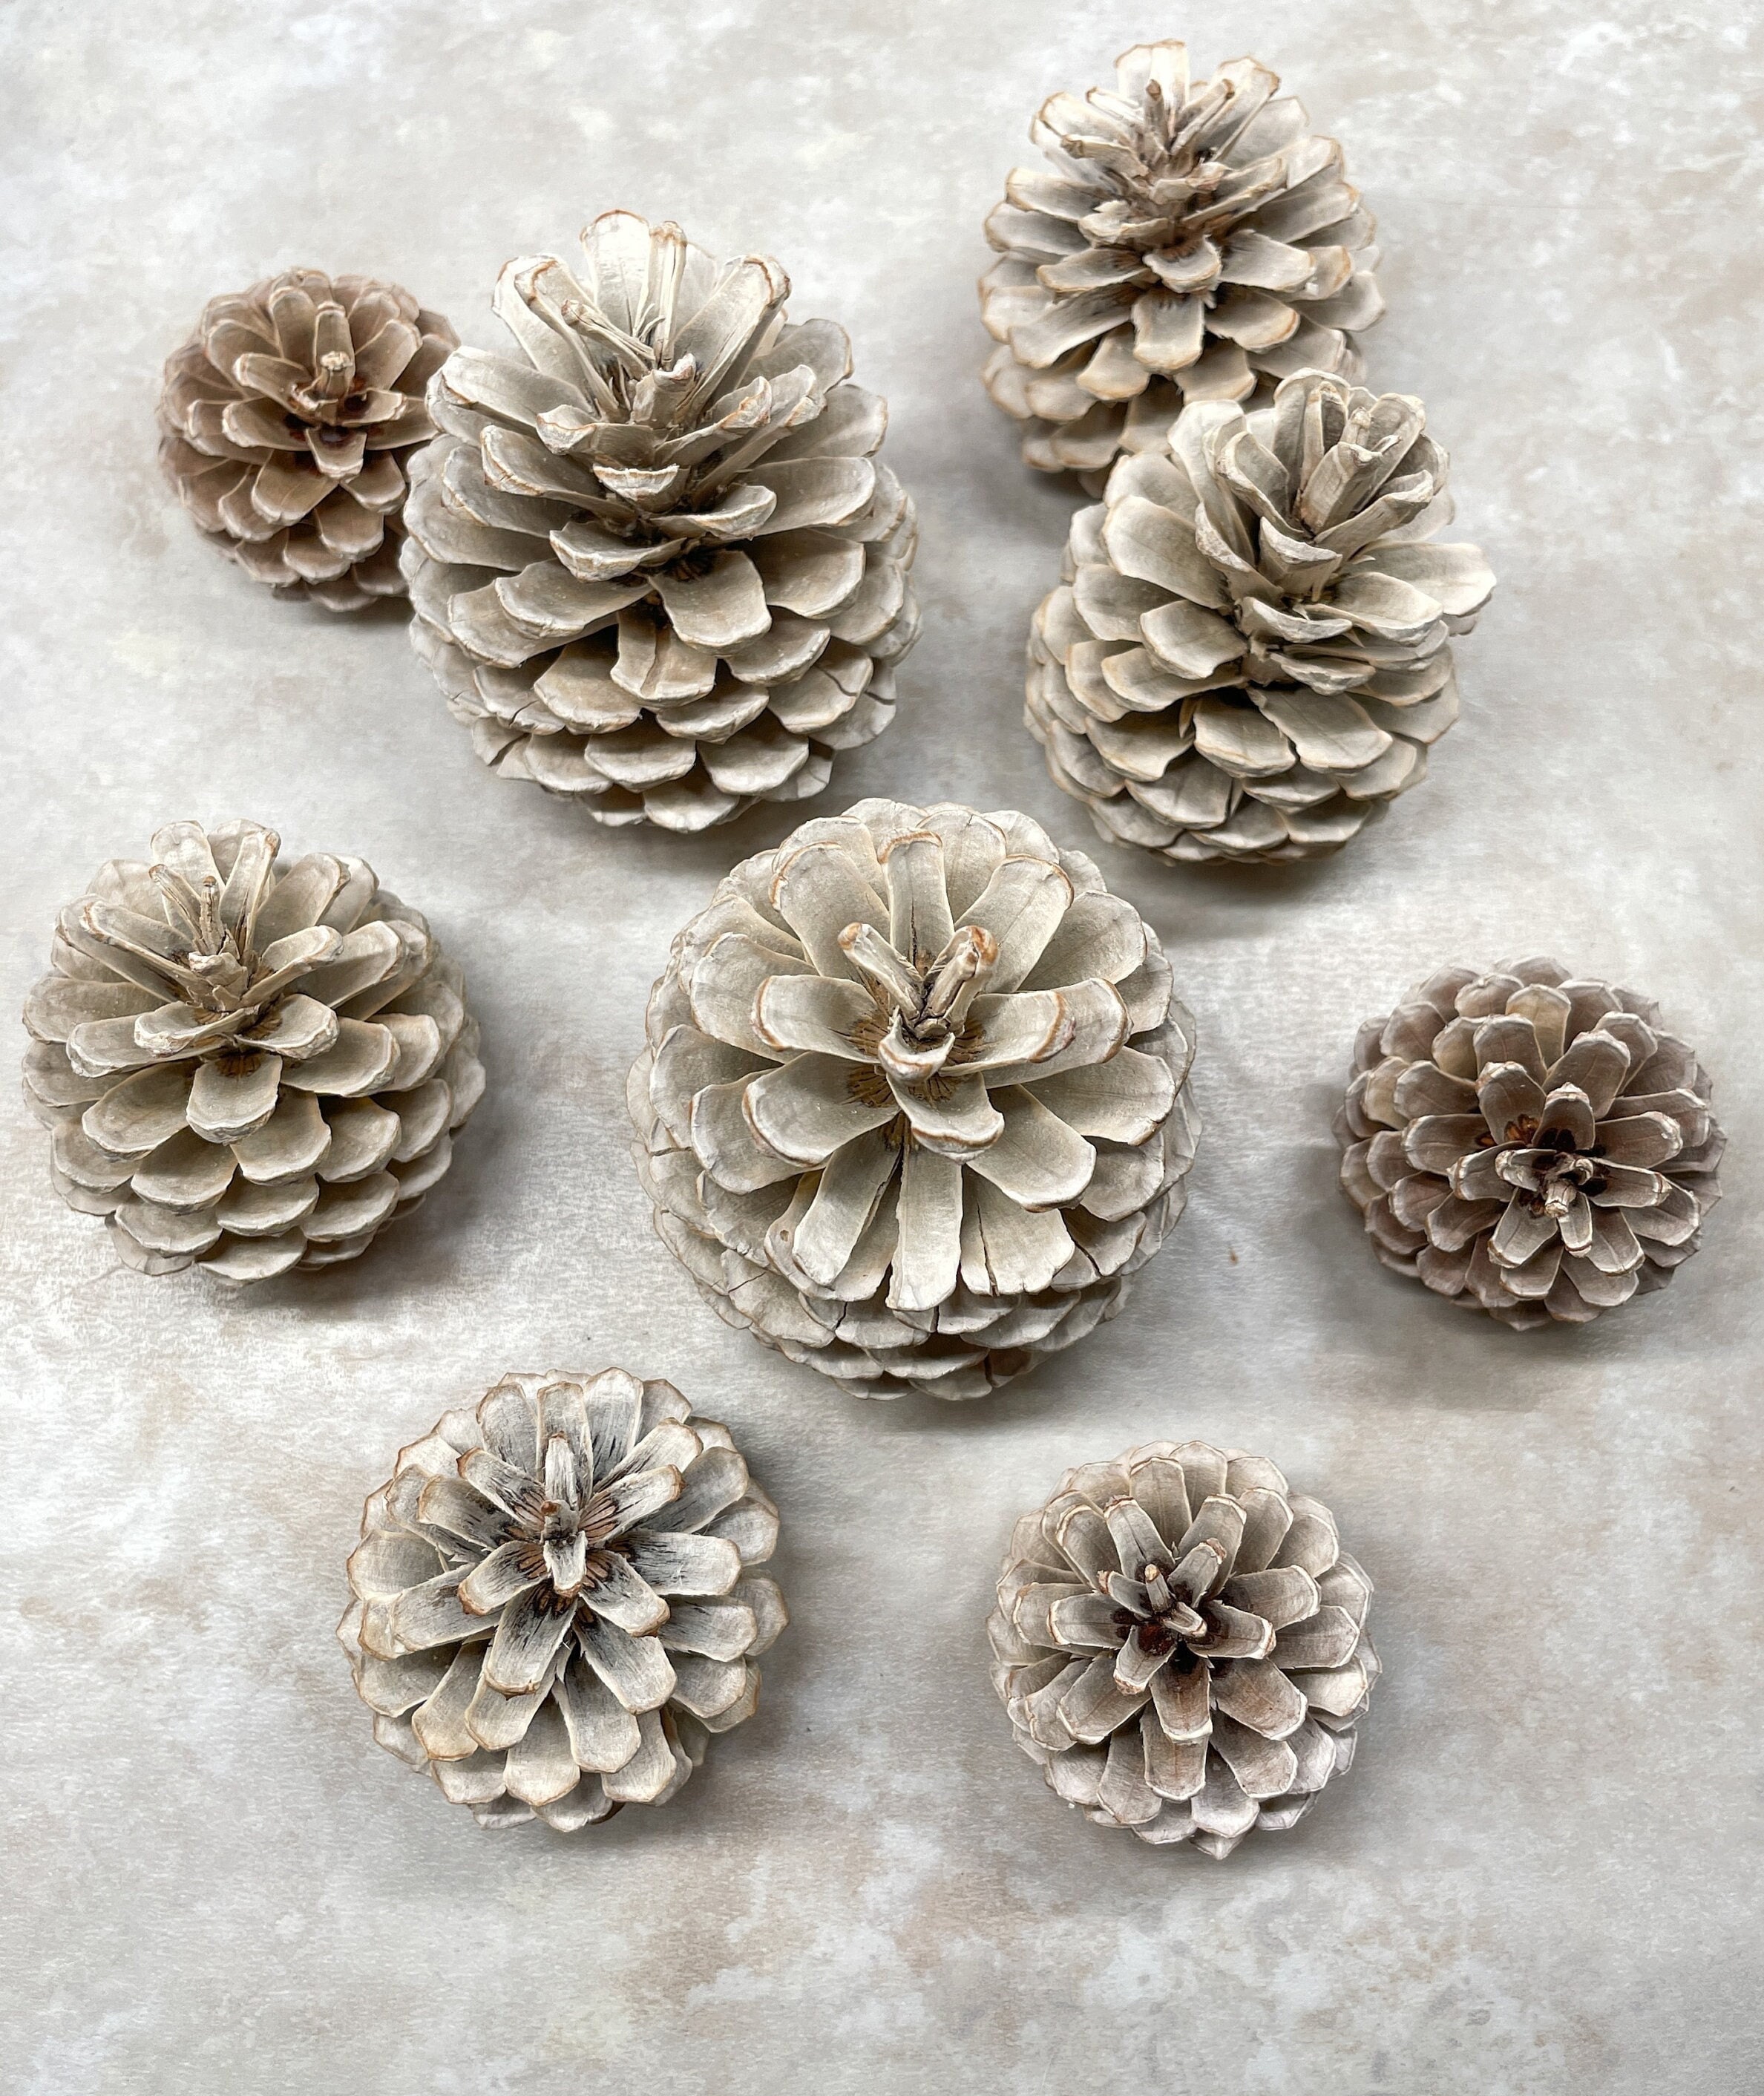 Eastern White Pine Cones 75, Large, Bulk, Natural/ Untreated, Sanitized  Ontario, Canada Pinecones/ Crafting, Wreaths, Rustic Wedding 